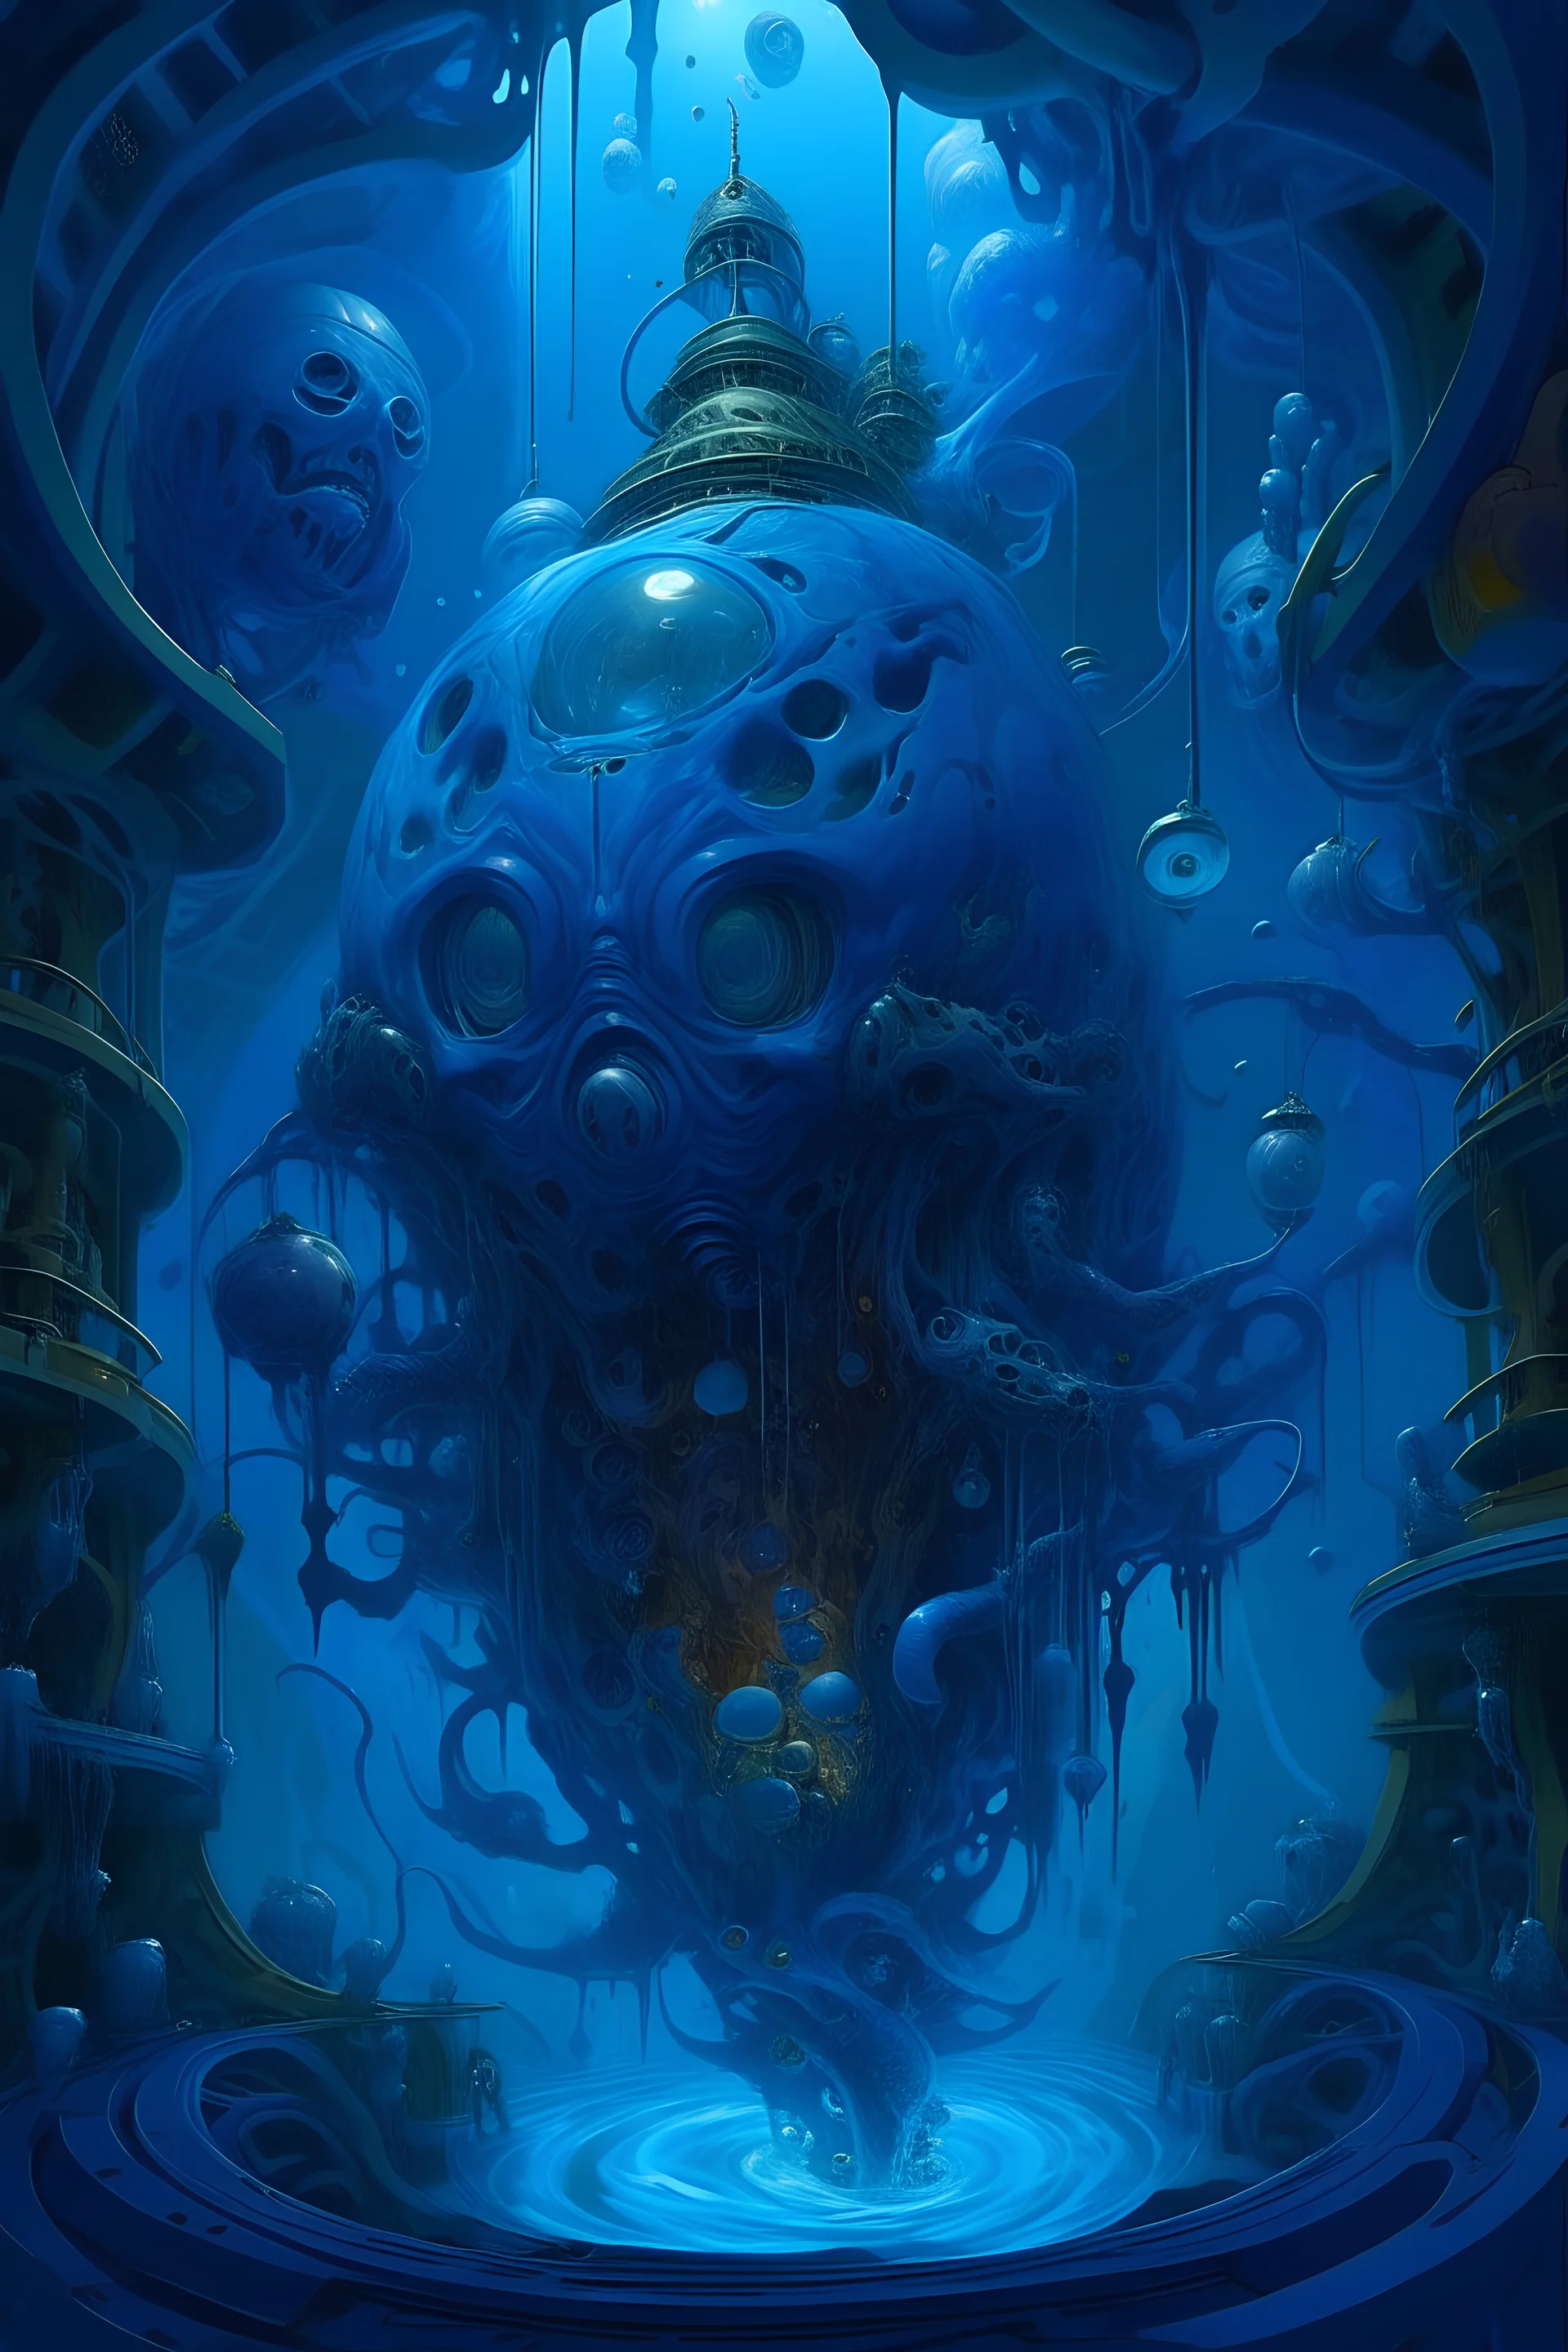 Mutated Guild Navigator suspended in a tank filled with spice gas, heads and extremities elongating become vaguely aquatic in appearance, Te Eyes Darkblue in blue, Alexandro Jodorowsy Art,Juan Gimenez Art,Sci-Fic Art,NijiExpress 3D v2,Kinetic Art,Datanoshing,Oil painting,Ink v3,eyes blue in blue,Abstract Tech,CyberTech Elements,Deco Influence,Air Brush style